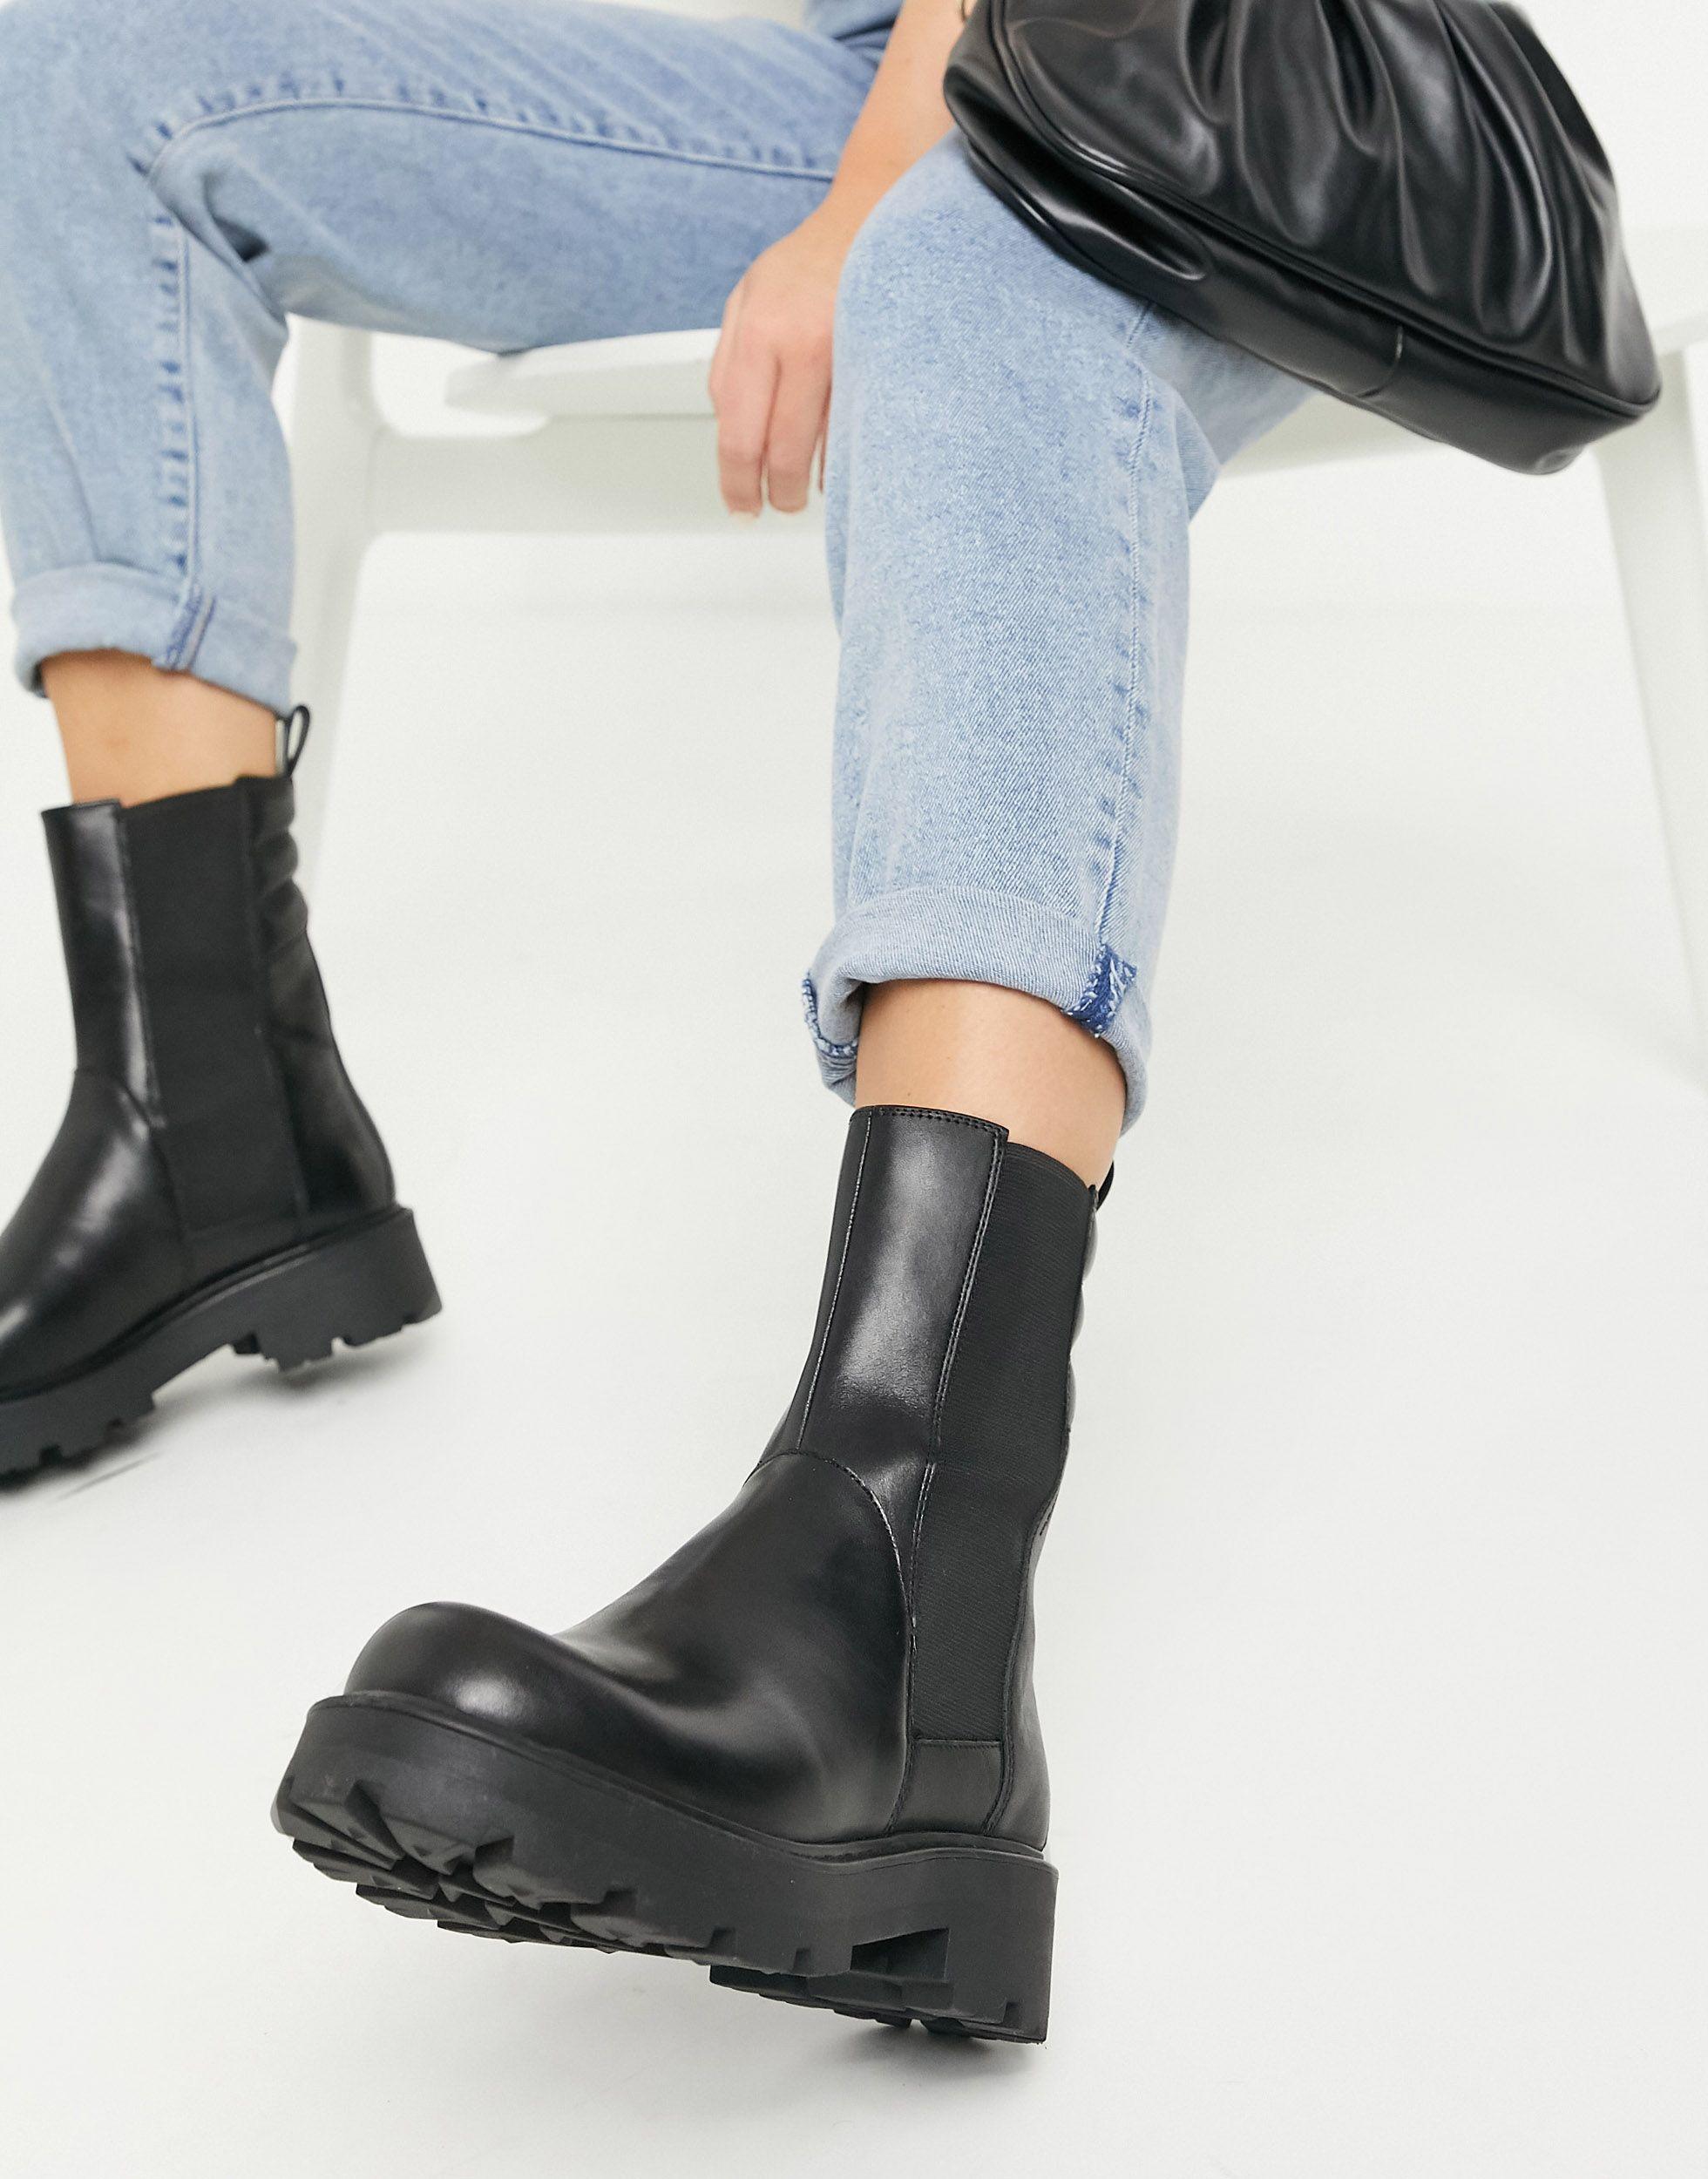 Vagabond Shoemakers Cosmo 2.0 Flat Ankle Calf Boot in Black | Lyst